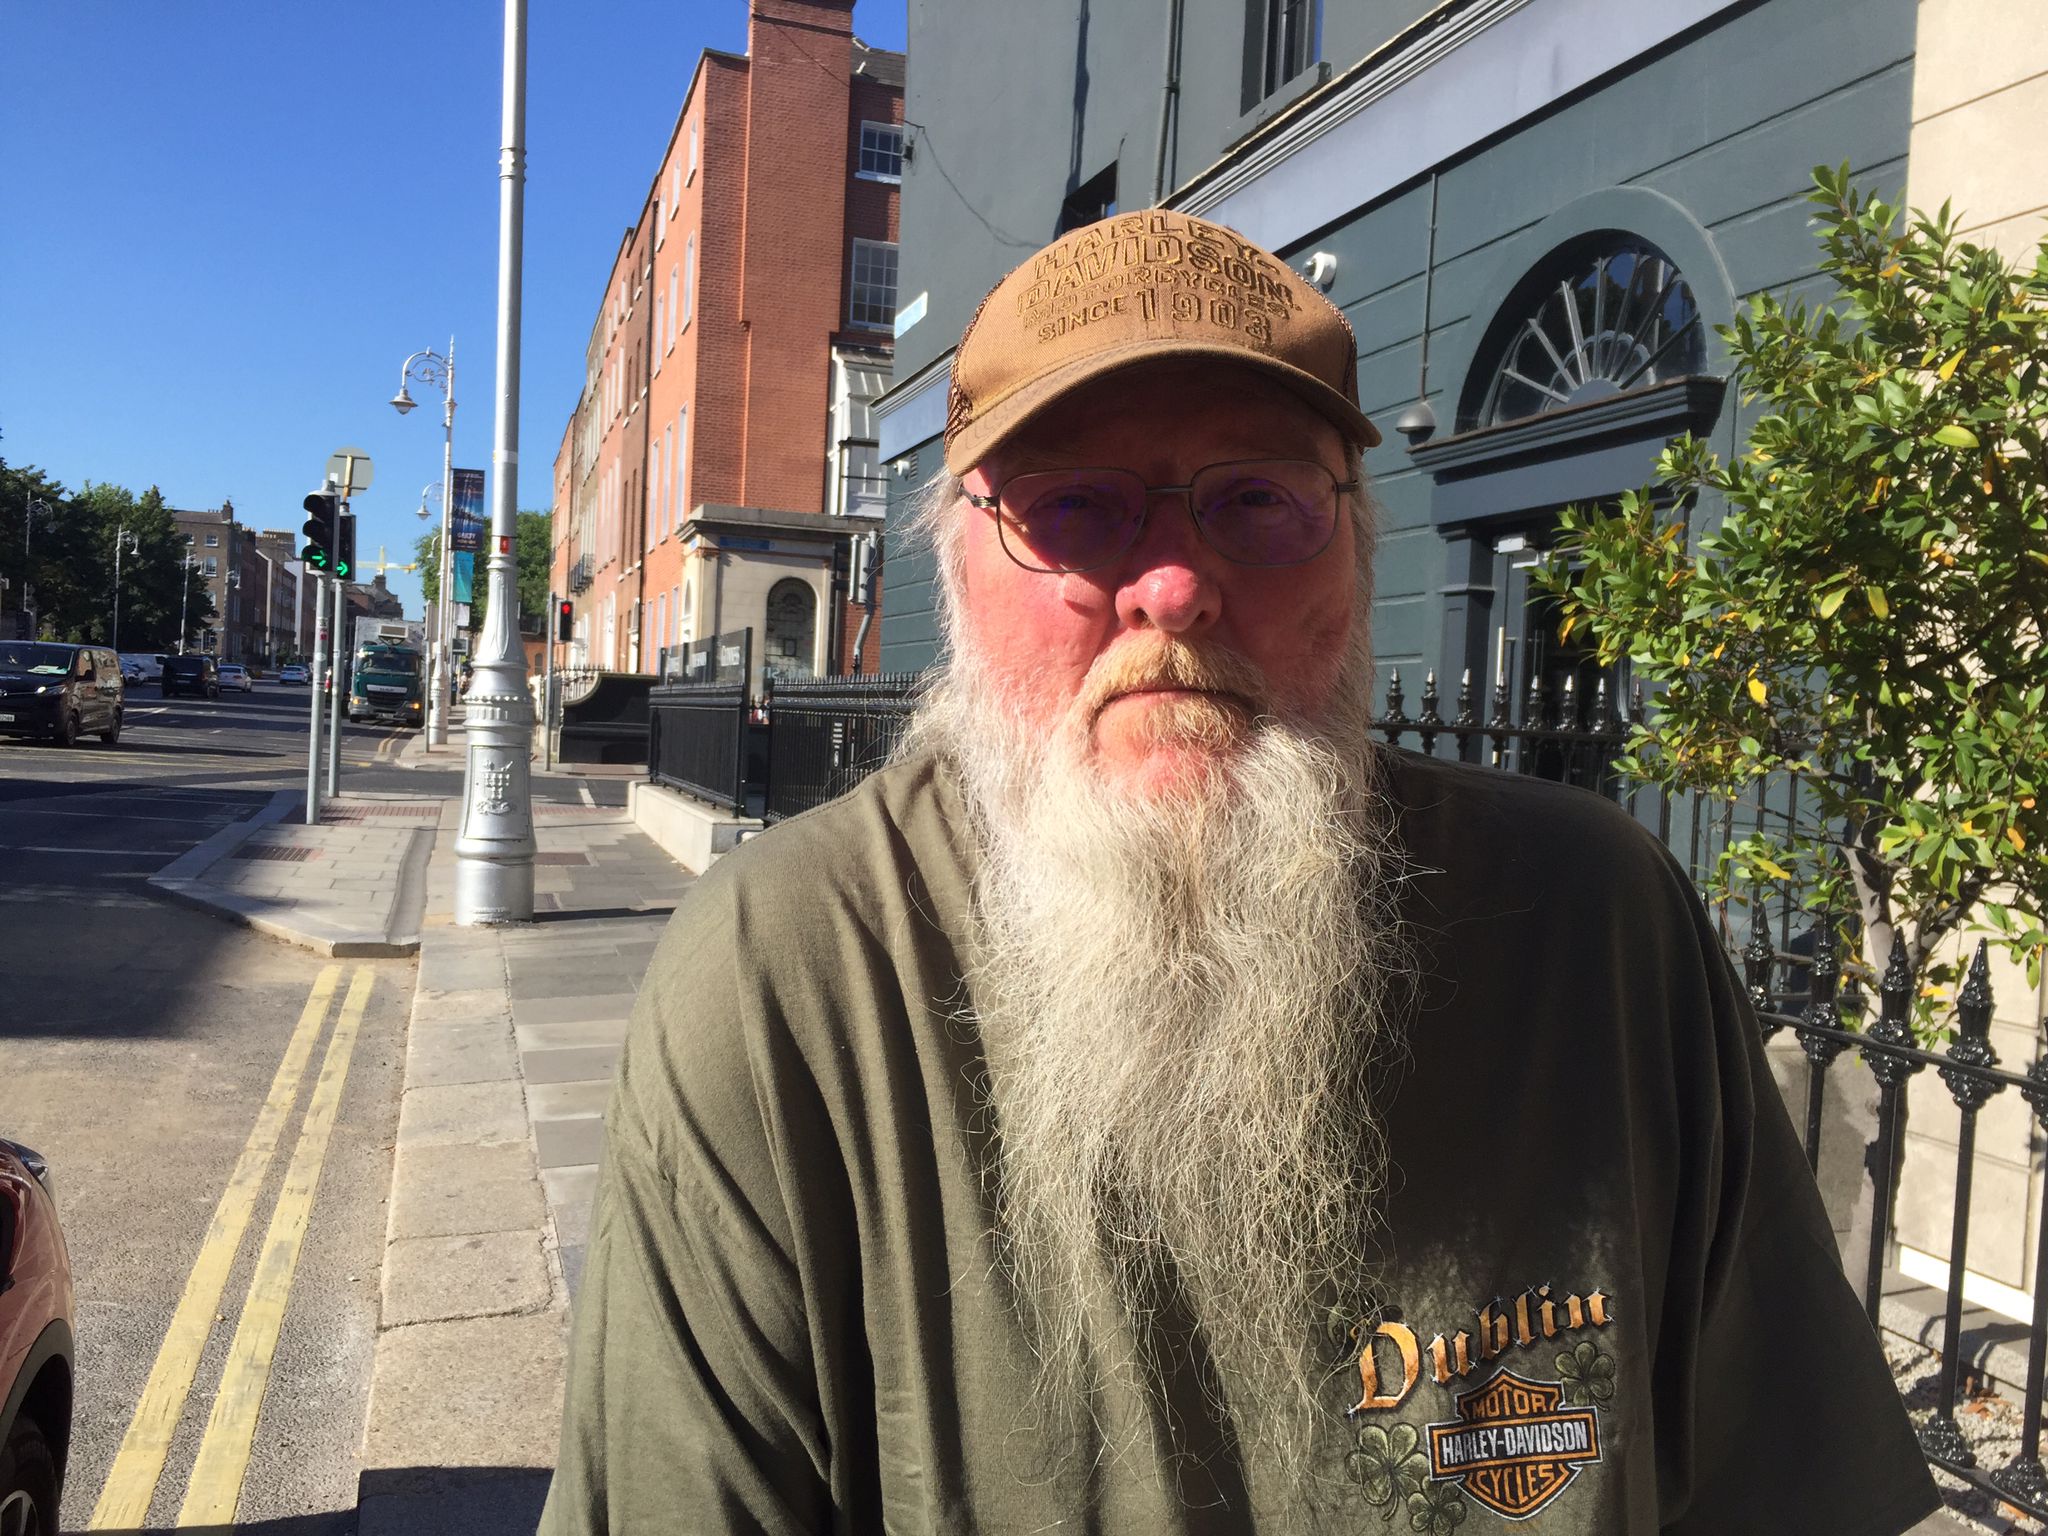 Ray Kemble in Ireland to fight fracking